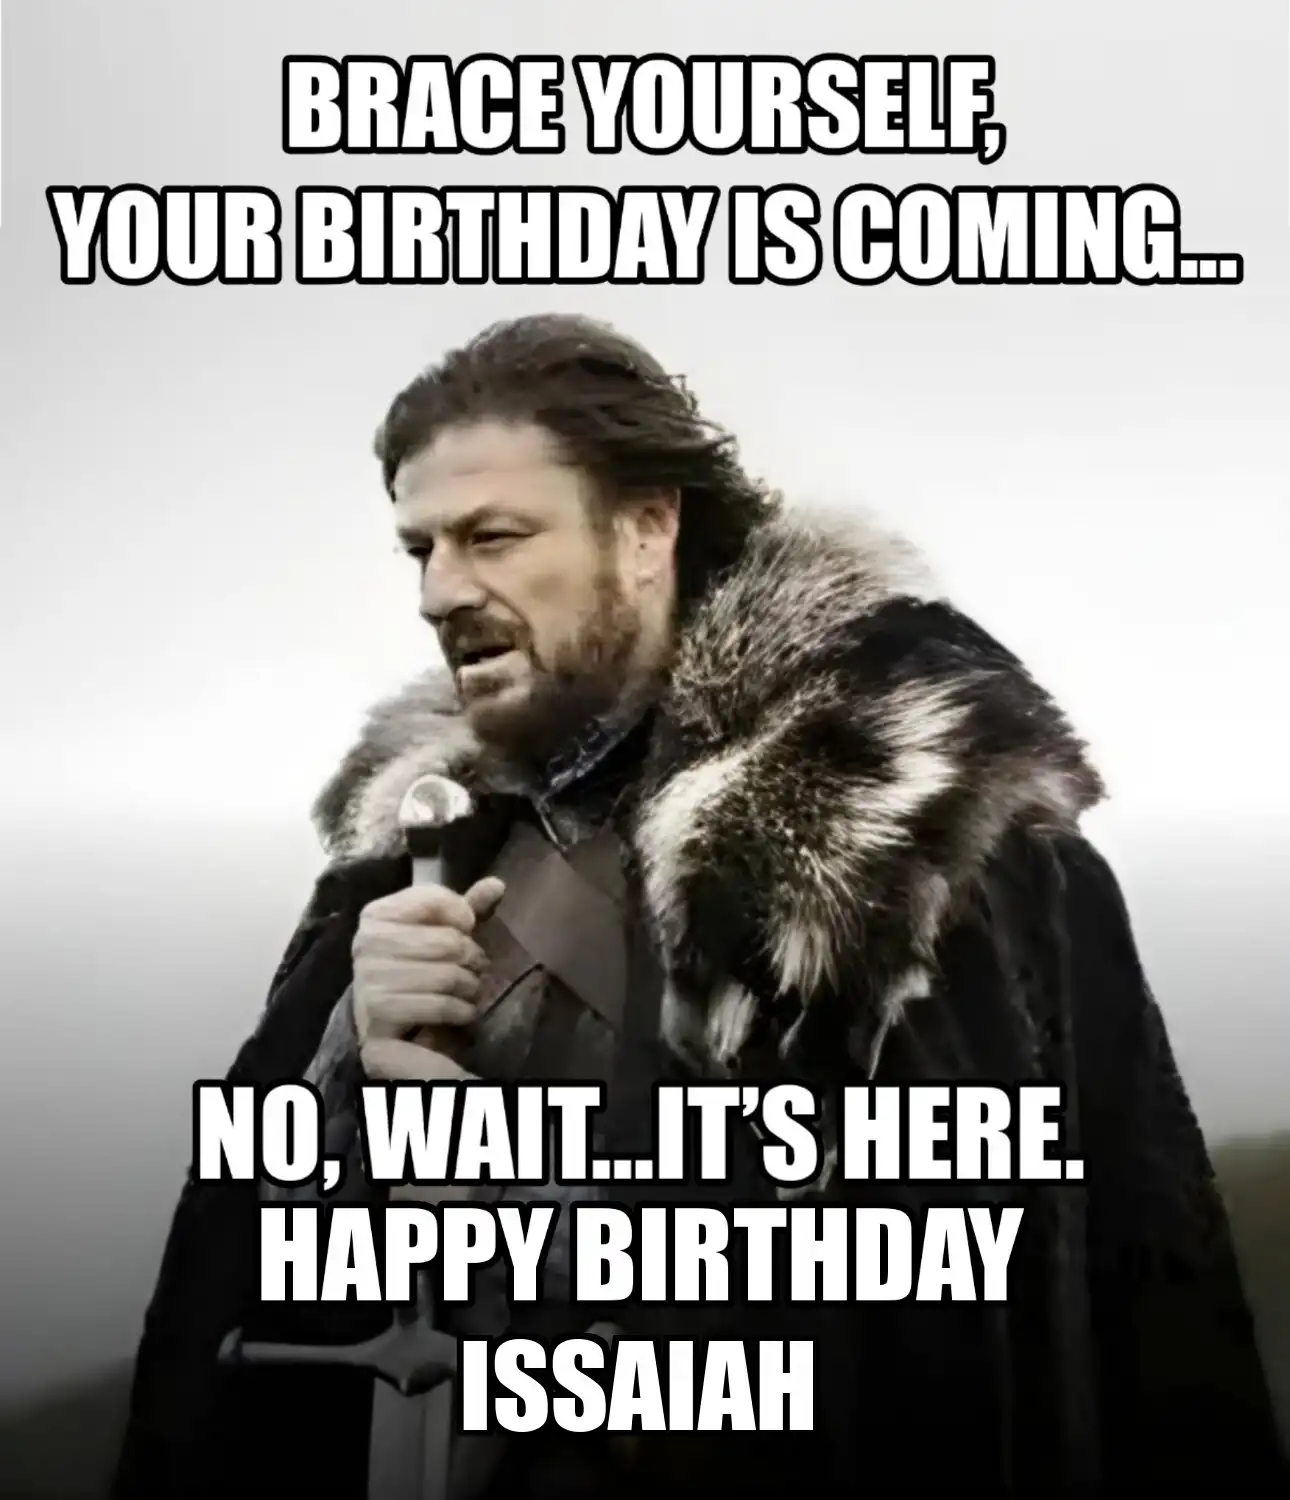 Happy Birthday Issaiah Brace Yourself Your Birthday Is Coming Meme